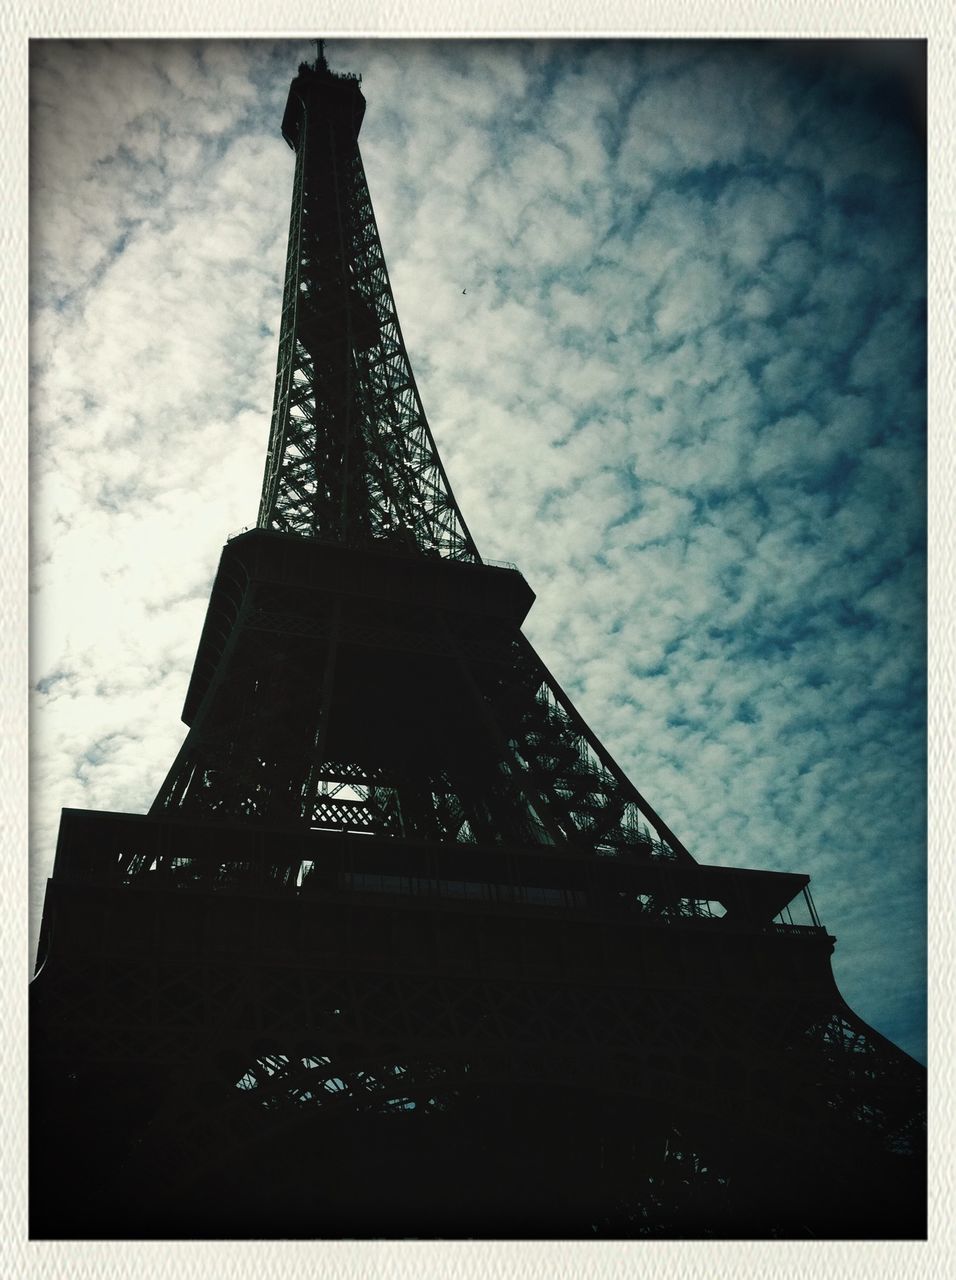 architecture, built structure, low angle view, sky, building exterior, cloud - sky, transfer print, tower, tall - high, auto post production filter, cloudy, eiffel tower, international landmark, famous place, travel destinations, cloud, city, metal, capital cities, outdoors